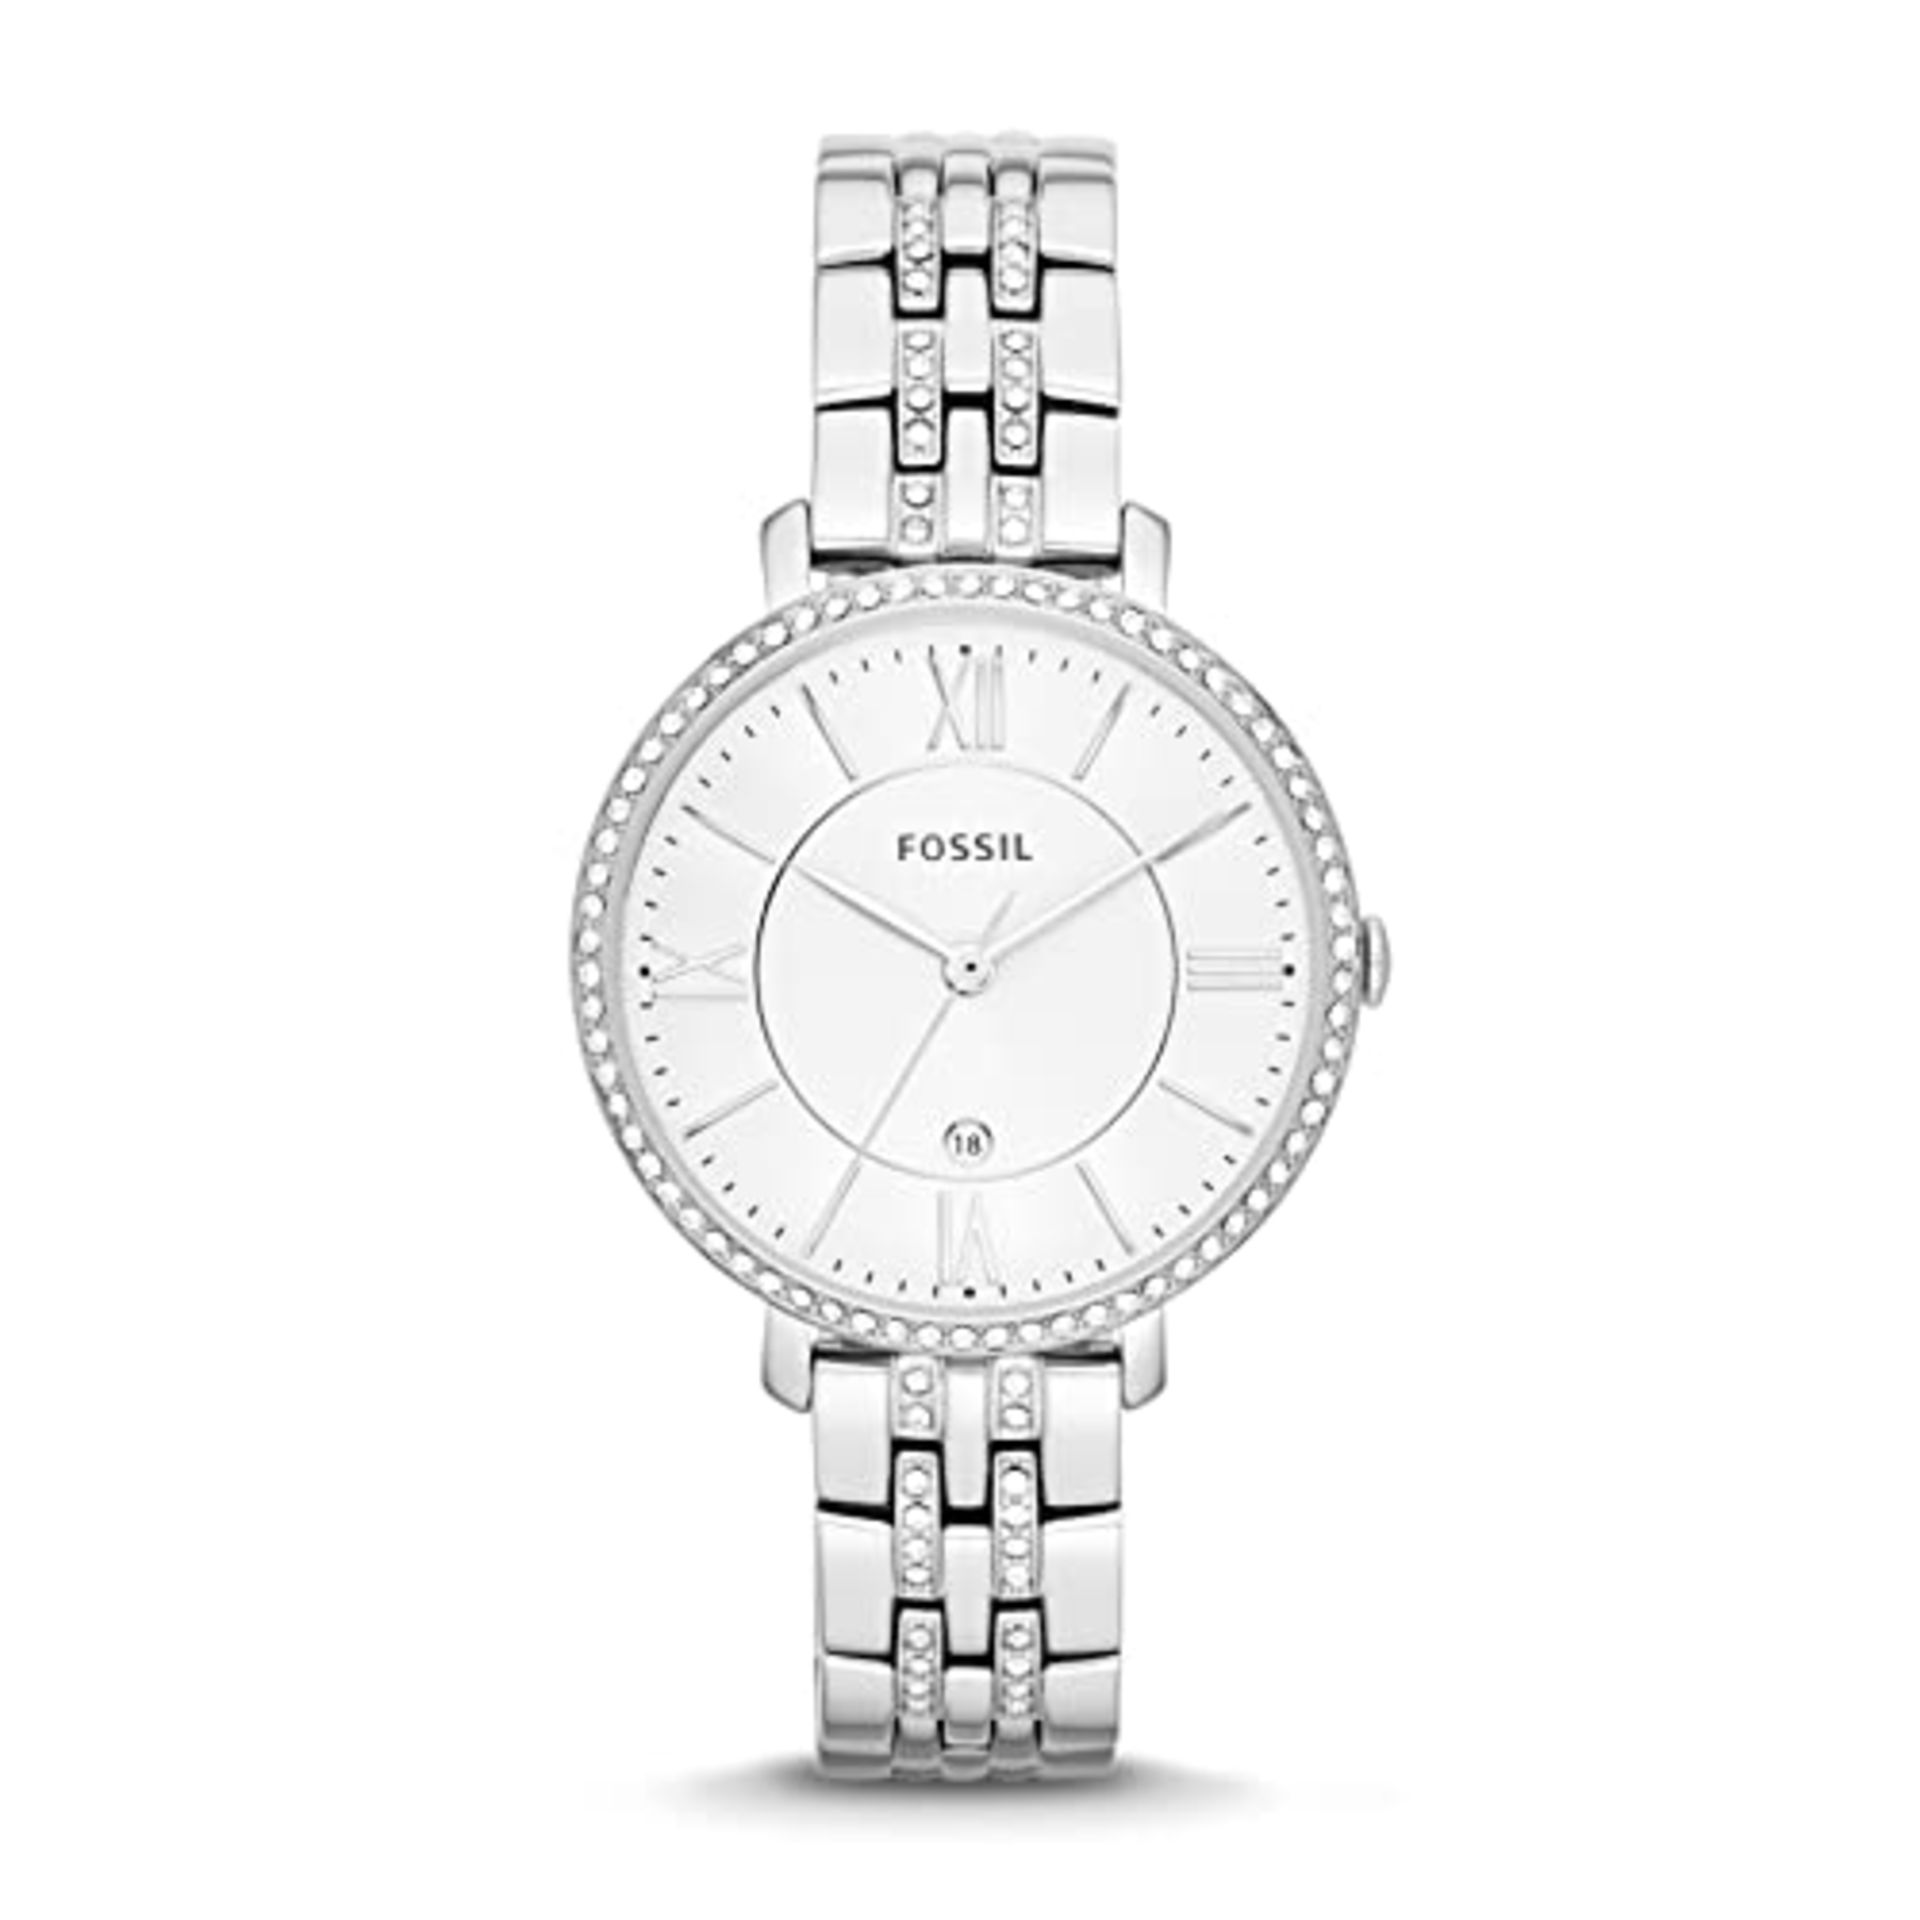 RRP £83.00 Fossil Women's Analog Quartz Watch with Stainless Steel Bracelet ES3545 - Image 4 of 6